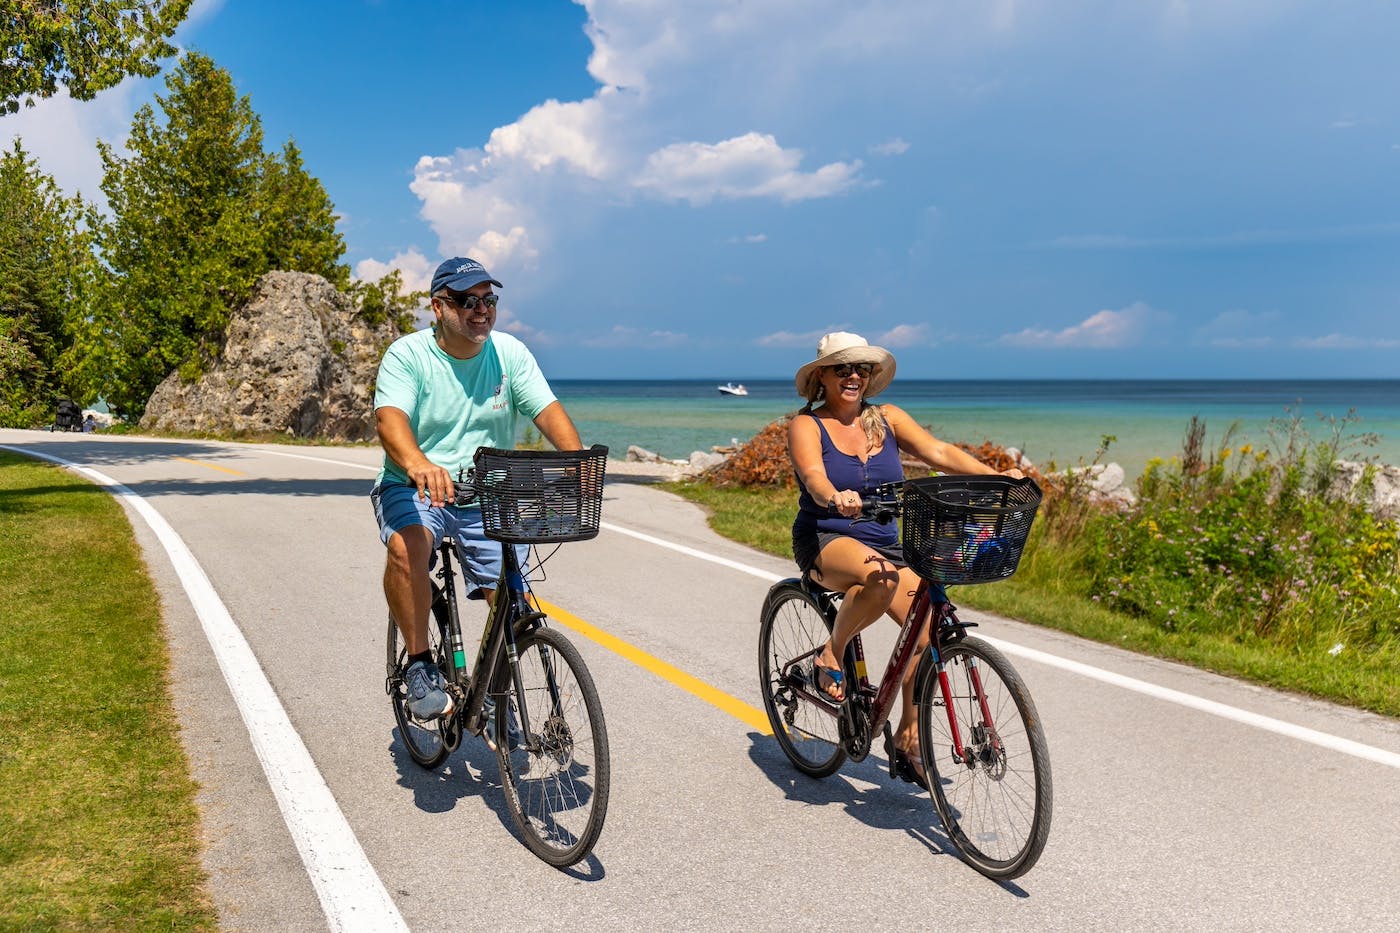 Imagery for the This Michigan Tourist Destination is the Best Place to Bike in the U.S. story